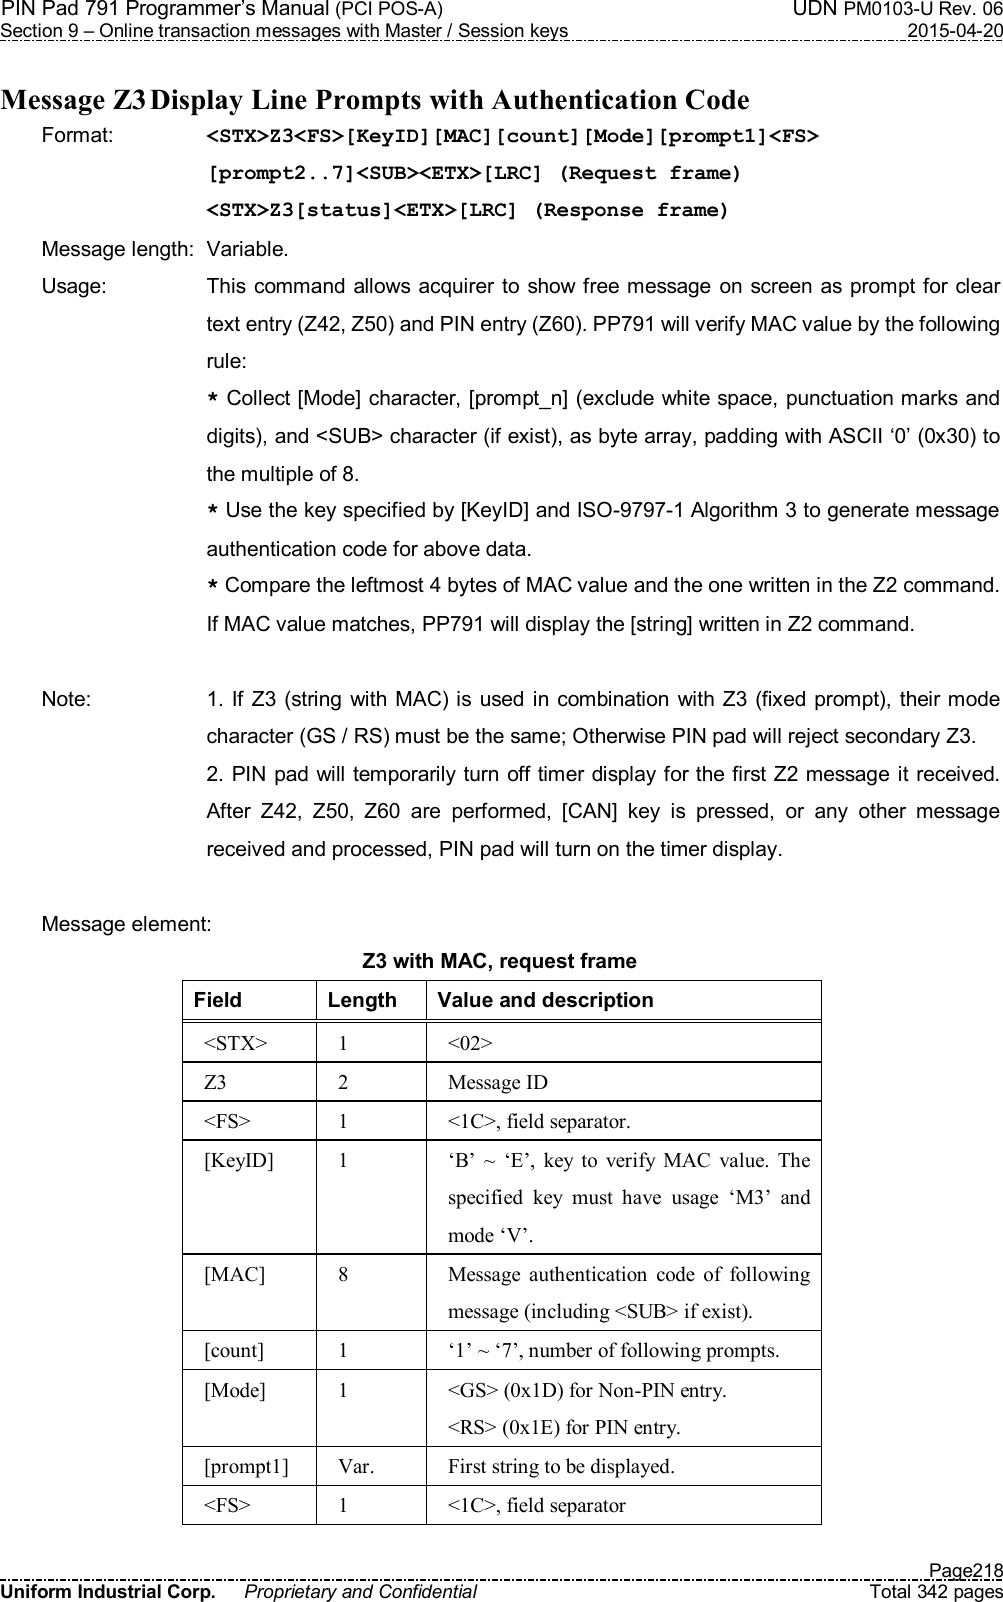 PIN Pad 791 Programmer’s Manual (PCI POS-A)  UDN PM0103-U Rev. 06 Section 9 – Online transaction messages with Master / Session keys  2015-04-20   Page218 Uniform Industrial Corp.  Proprietary and Confidential  Total 342 pages  Message Z3 Display Line Prompts with Authentication Code Format:    &lt;STX&gt;Z3&lt;FS&gt;[KeyID][MAC][count][Mode][prompt1]&lt;FS&gt; [prompt2..7]&lt;SUB&gt;&lt;ETX&gt;[LRC] (Request frame) &lt;STX&gt;Z3[status]&lt;ETX&gt;[LRC] (Response frame) Message length:  Variable. Usage:  This command allows  acquirer to show free message on screen as prompt for  clear text entry (Z42, Z50) and PIN entry (Z60). PP791 will verify MAC value by the following rule: * Collect [Mode] character, [prompt_n] (exclude white space, punctuation marks and digits), and &lt;SUB&gt; character (if exist), as byte array, padding with ASCII ‘0’ (0x30) to the multiple of 8. * Use the key specified by [KeyID] and ISO-9797-1 Algorithm 3 to generate message authentication code for above data. * Compare the leftmost 4 bytes of MAC value and the one written in the Z2 command. If MAC value matches, PP791 will display the [string] written in Z2 command.  Note:  1. If  Z3 (string with  MAC) is used in combination with  Z3 (fixed prompt), their mode character (GS / RS) must be the same; Otherwise PIN pad will reject secondary Z3. 2. PIN pad will temporarily turn off timer display for the first Z2 message it received. After  Z42,  Z50,  Z60  are  performed,  [CAN]  key  is  pressed,  or  any  other  message received and processed, PIN pad will turn on the timer display.  Message element:   Z3 with MAC, request frame Field  Length  Value and description &lt;STX&gt;  1  &lt;02&gt; Z3  2  Message ID &lt;FS&gt;  1  &lt;1C&gt;, field separator. [KeyID]  1  ‘B’  ~  ‘E’,  key  to  verify  MAC  value.  The specified  key  must  have  usage  ‘M3’  and mode ‘V’.   [MAC]  8  Message  authentication  code  of  following message (including &lt;SUB&gt; if exist). [count]  1  ‘1’ ~ ‘7’, number of following prompts. [Mode]  1  &lt;GS&gt; (0x1D) for Non-PIN entry. &lt;RS&gt; (0x1E) for PIN entry. [prompt1]  Var.  First string to be displayed. &lt;FS&gt;  1  &lt;1C&gt;, field separator 